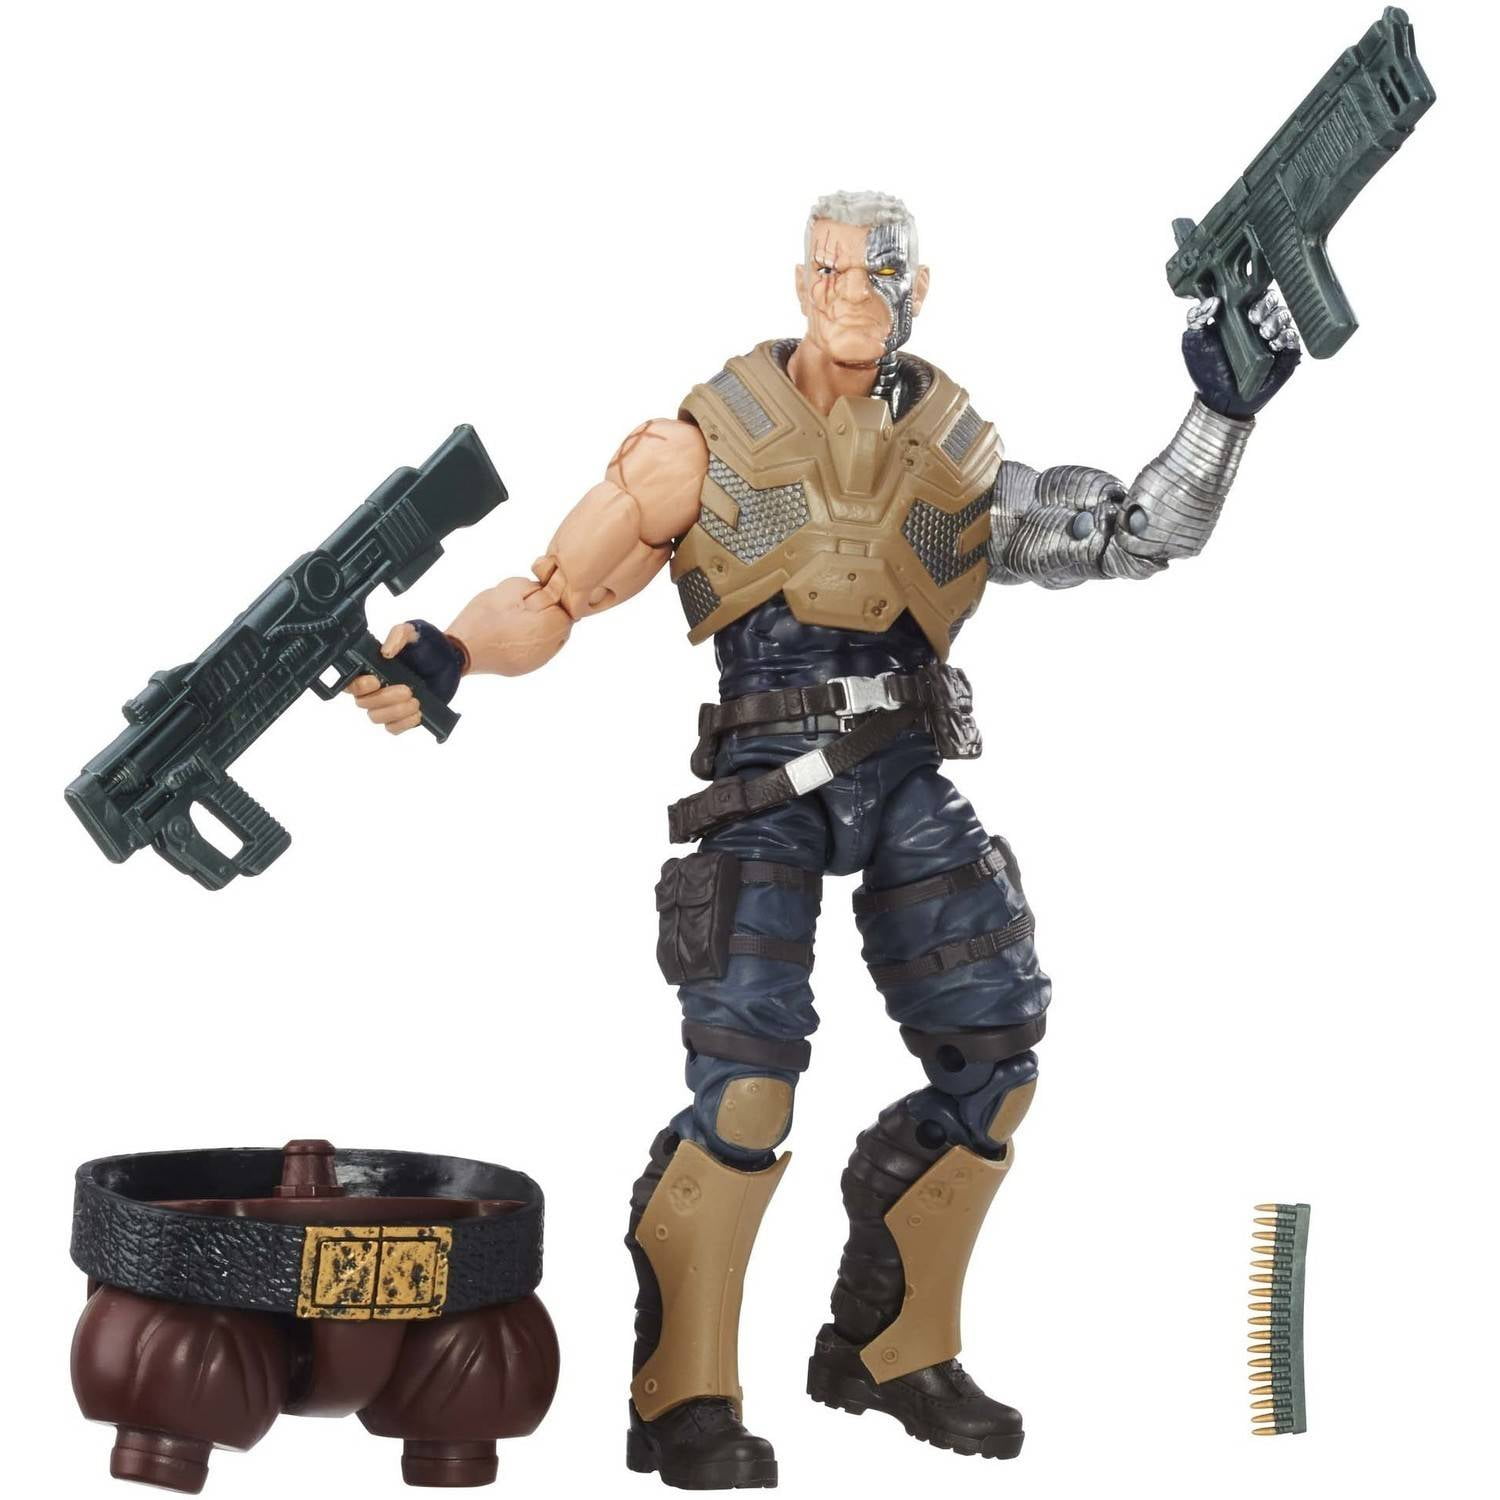 WALMART EXCLUSIVE IN-HAND CASE FRESH!!! MARVEL LEGENDS CABLE DEADPOOL 2 MOVIE 